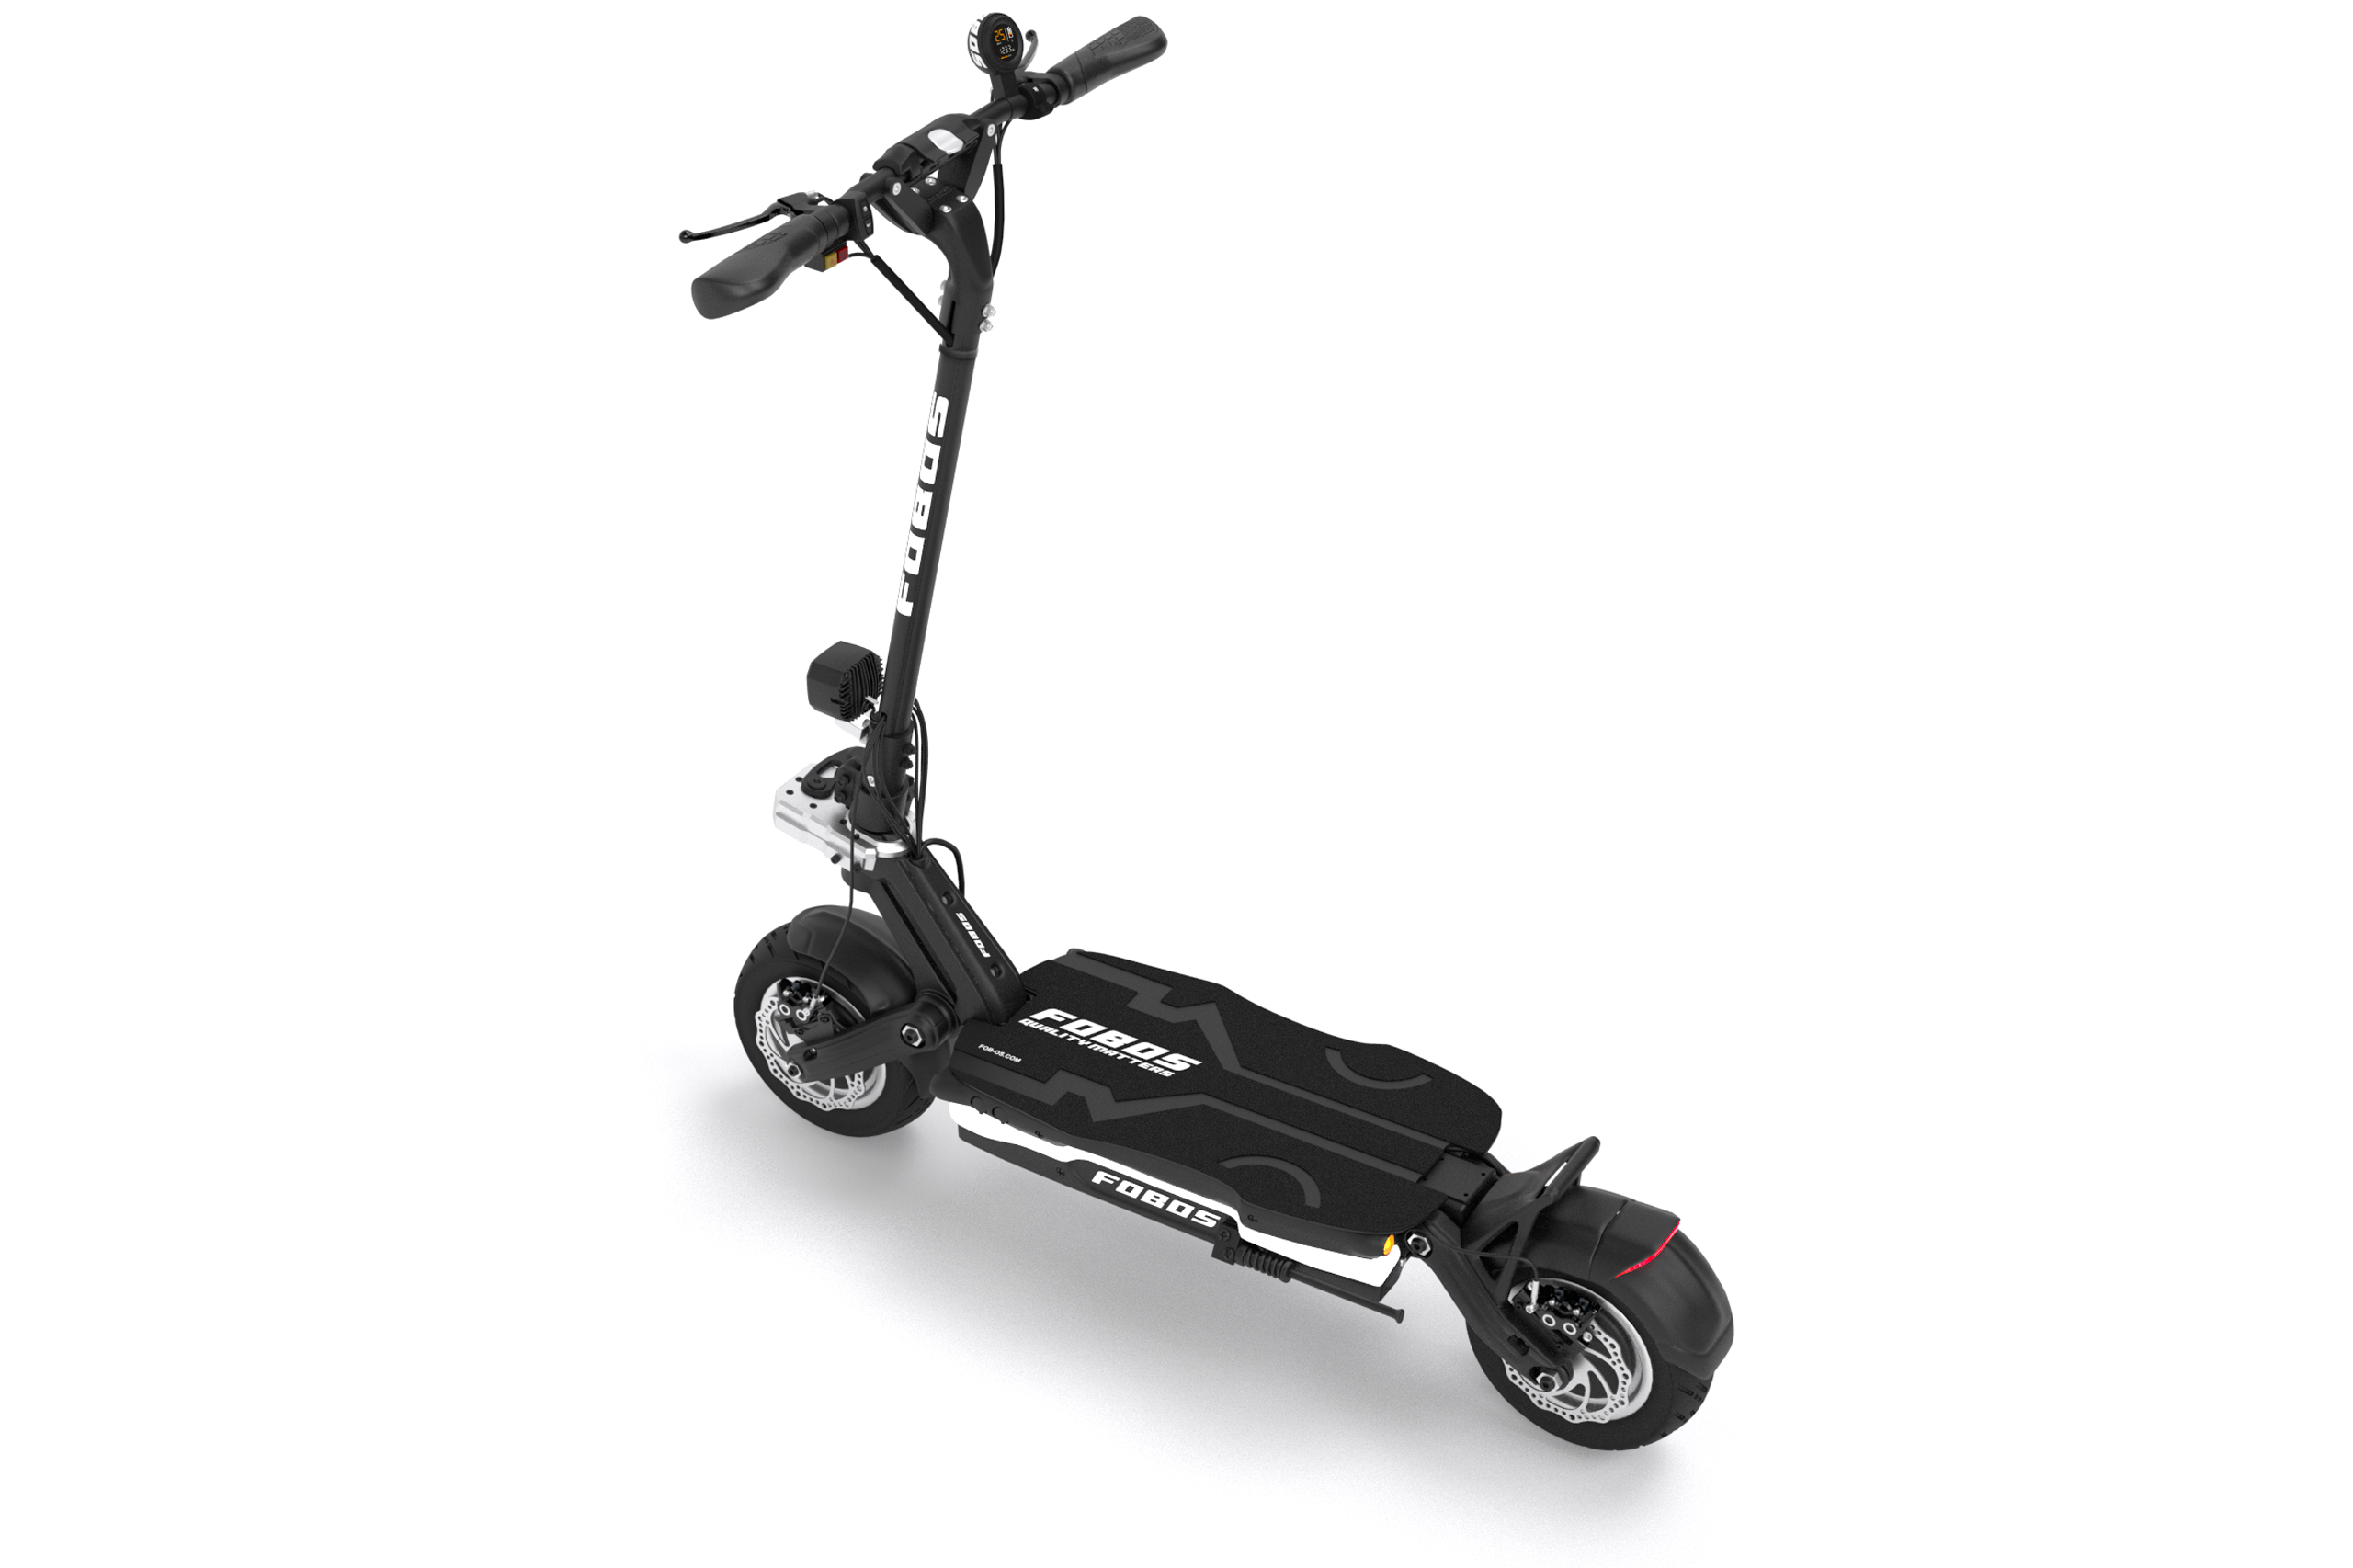 FOBOS X Electric Scooter - 70mph Max Speed